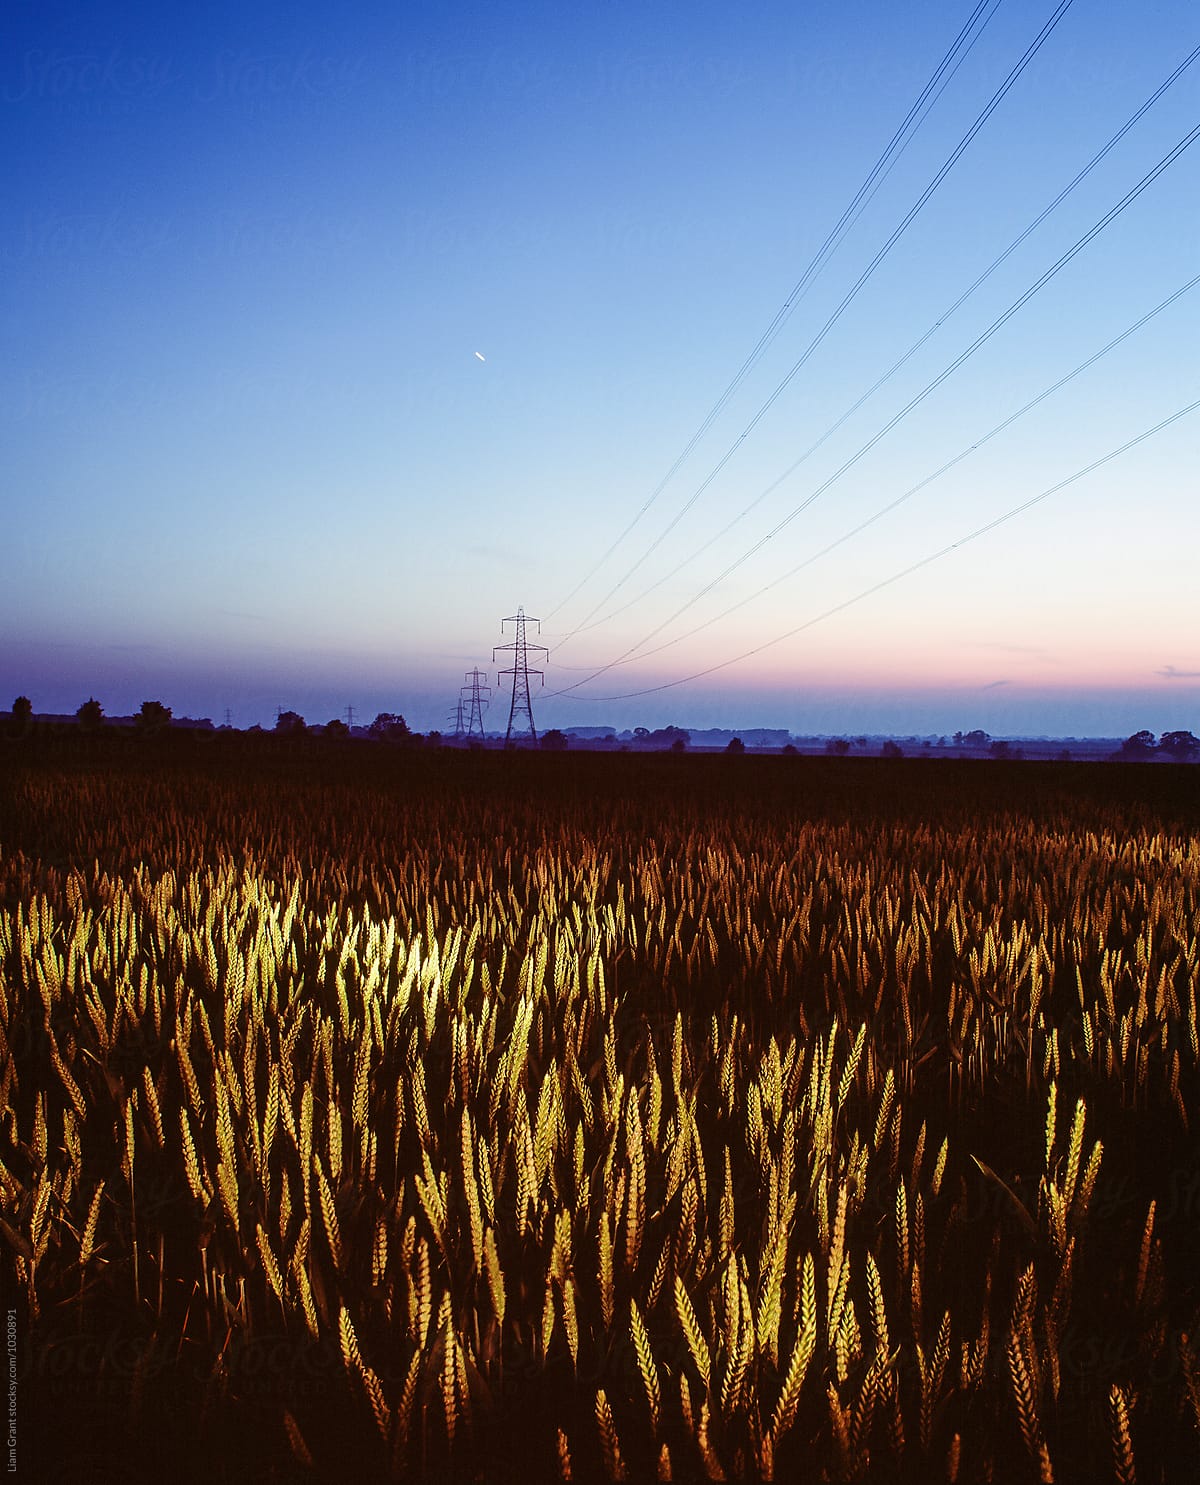 Wheat field and electricity pylon lit by torch light at twilight. Norfolk, UK.